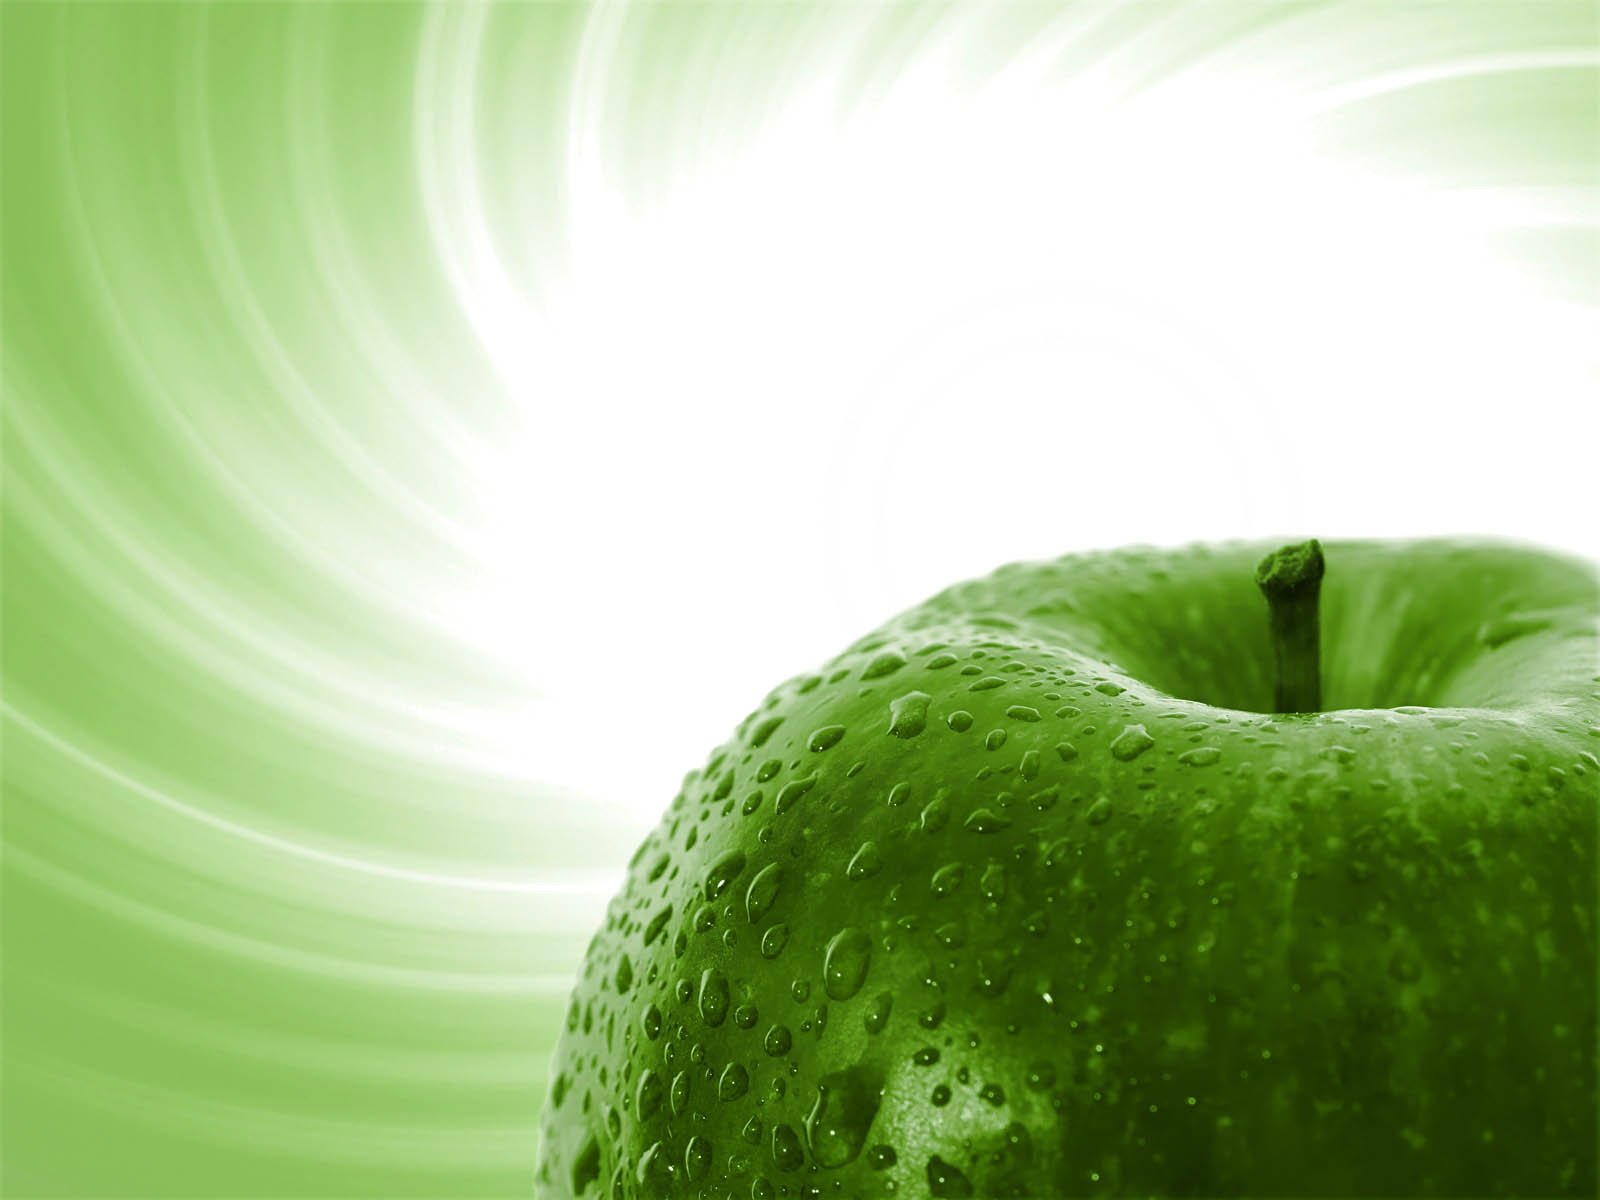 Free Green Apples Backgrounds For PowerPoint - Organic PPT Templates